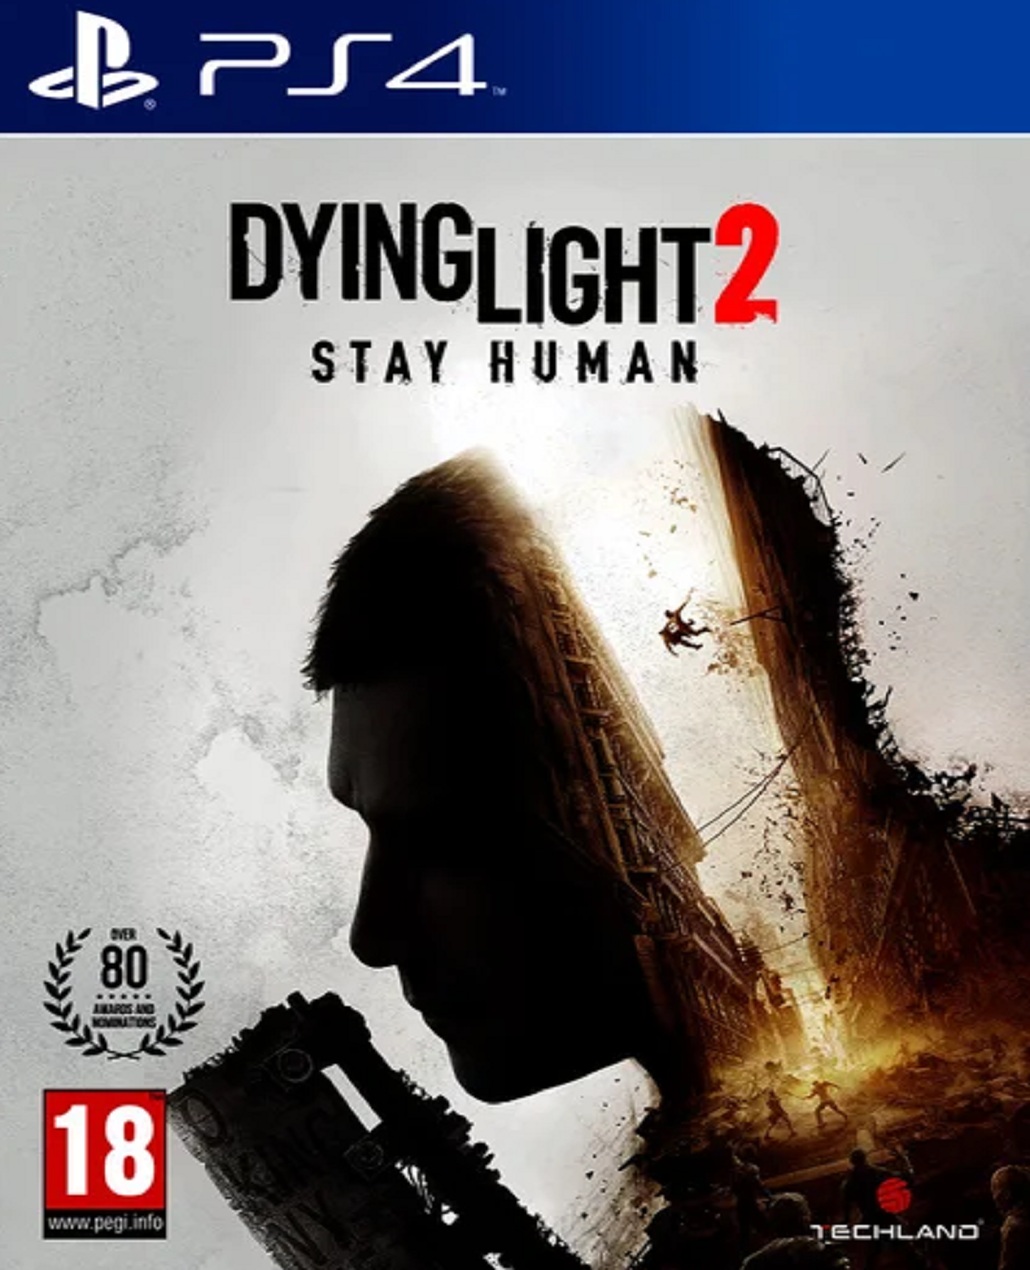 DYING LIGHT 2 - STAY HUMAN (PS4 - BAZAR)